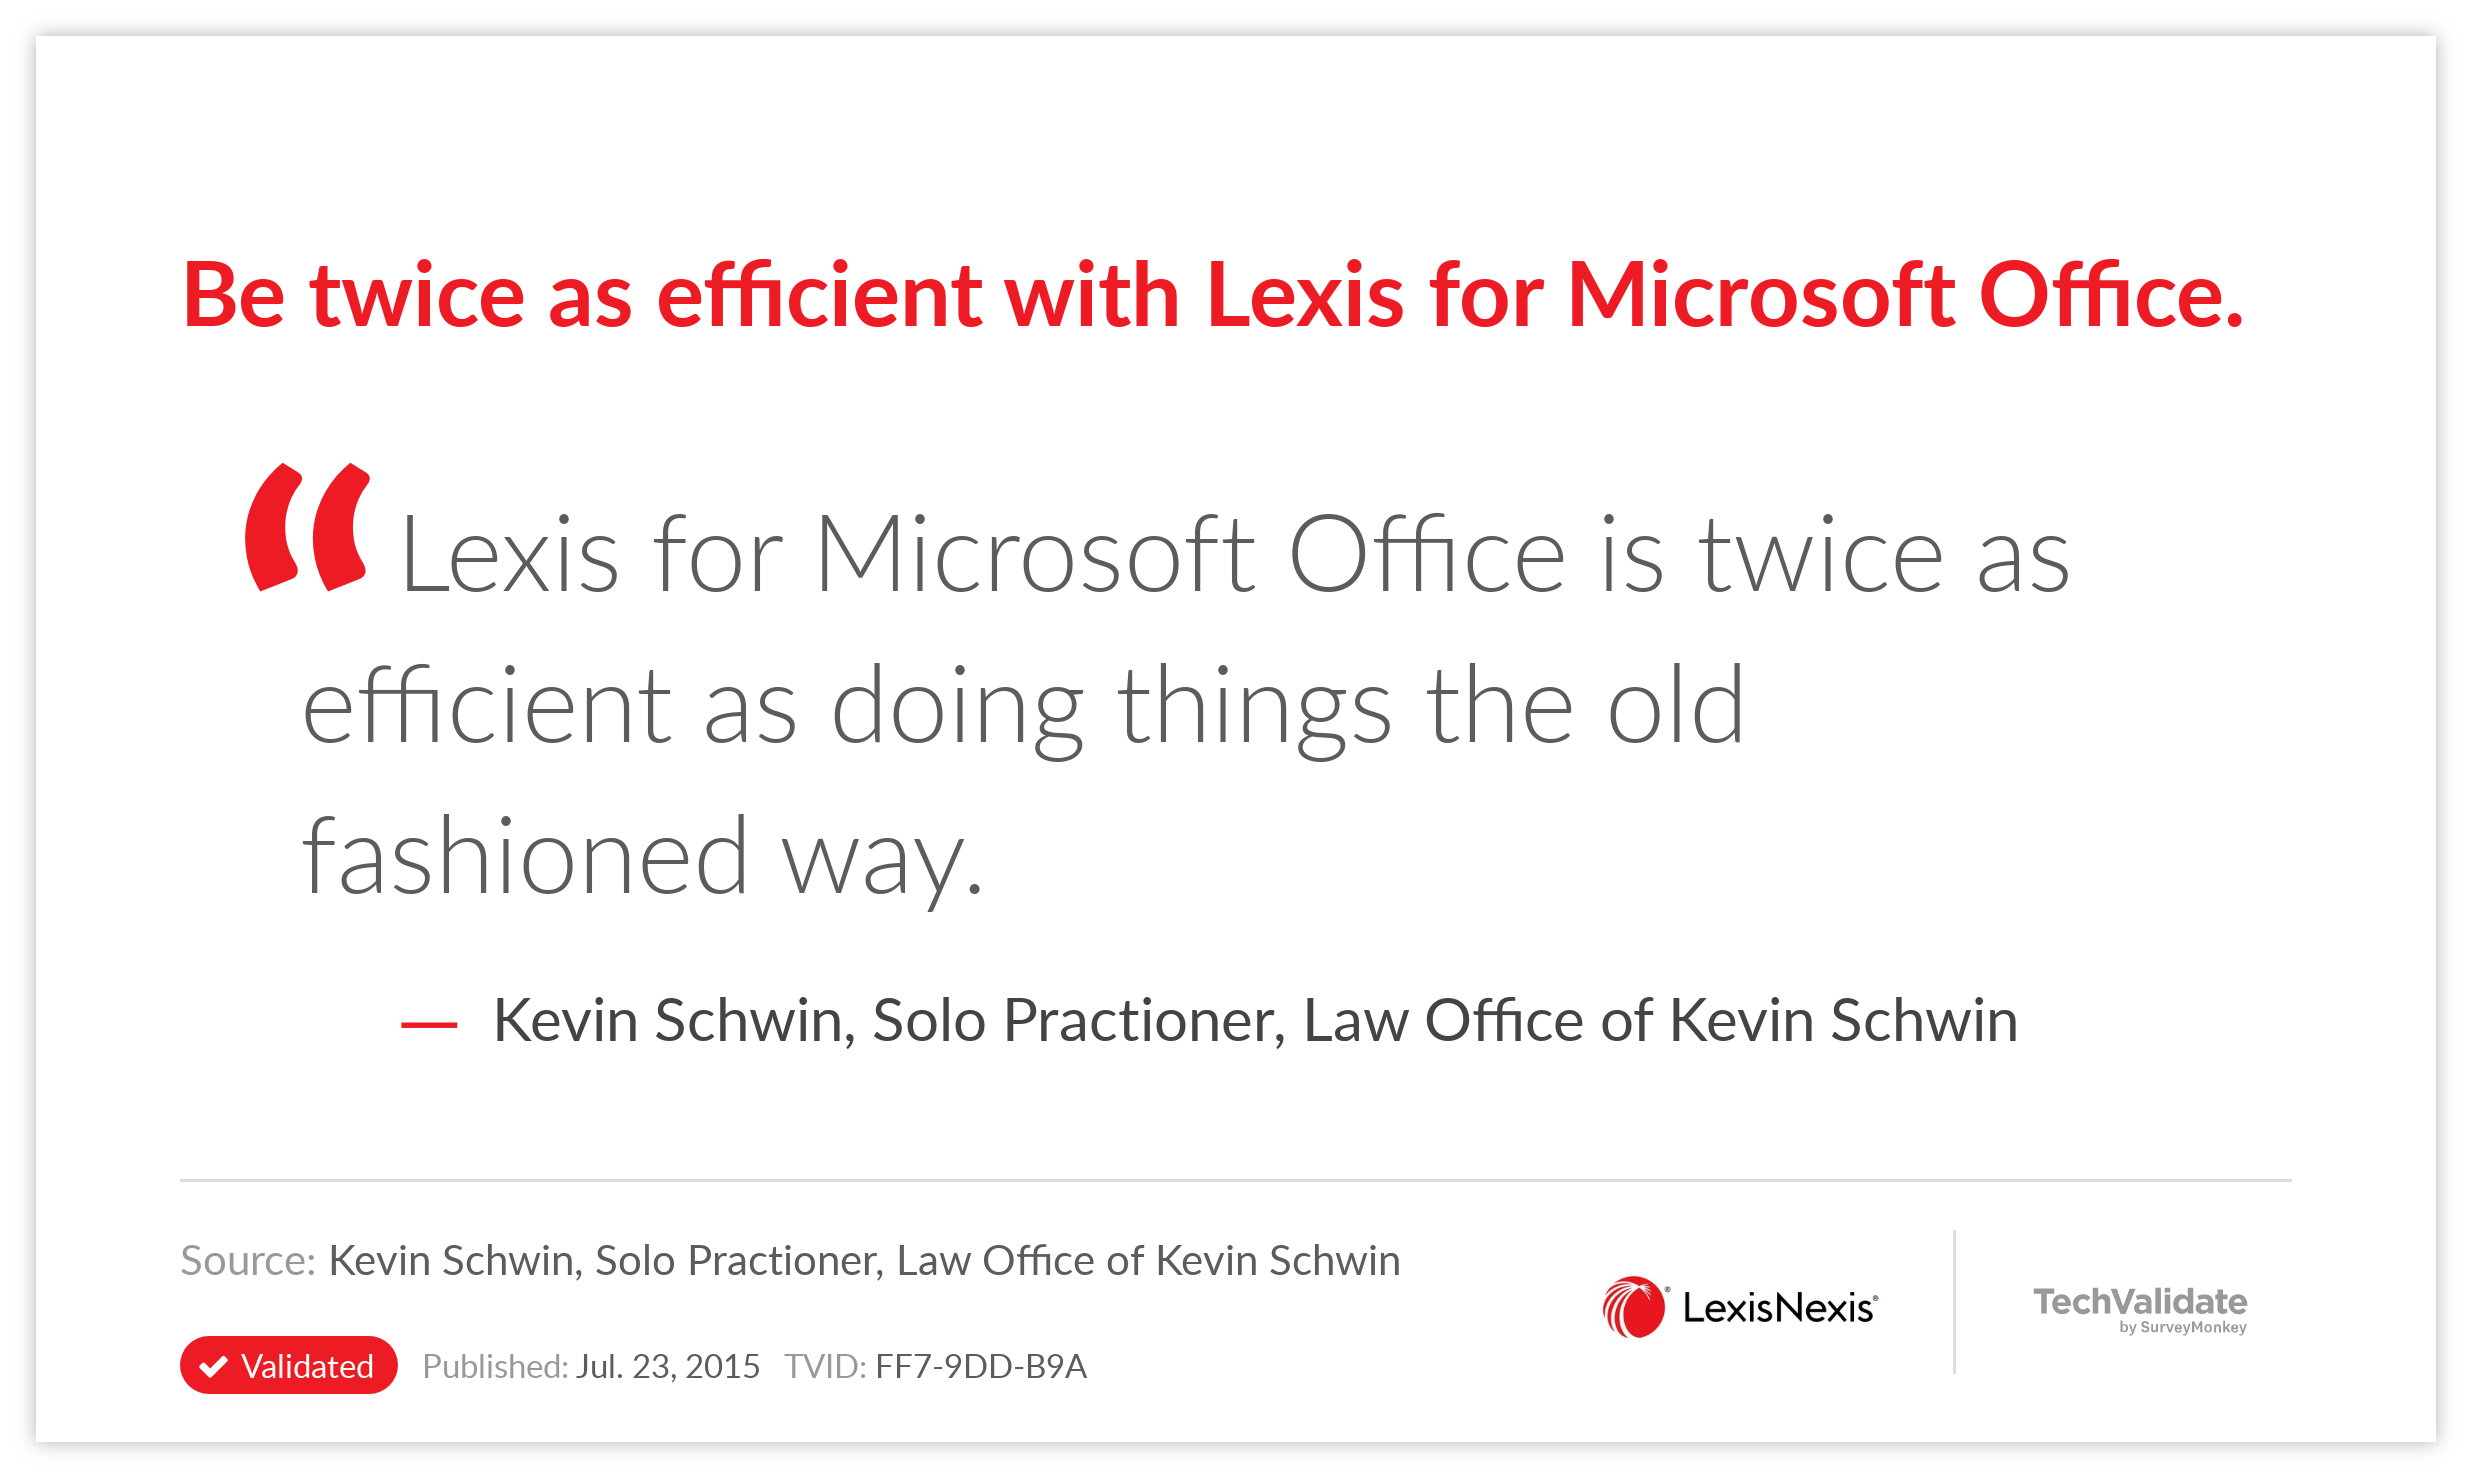 Be twice as efficient with Lexis for Microsoft Office.